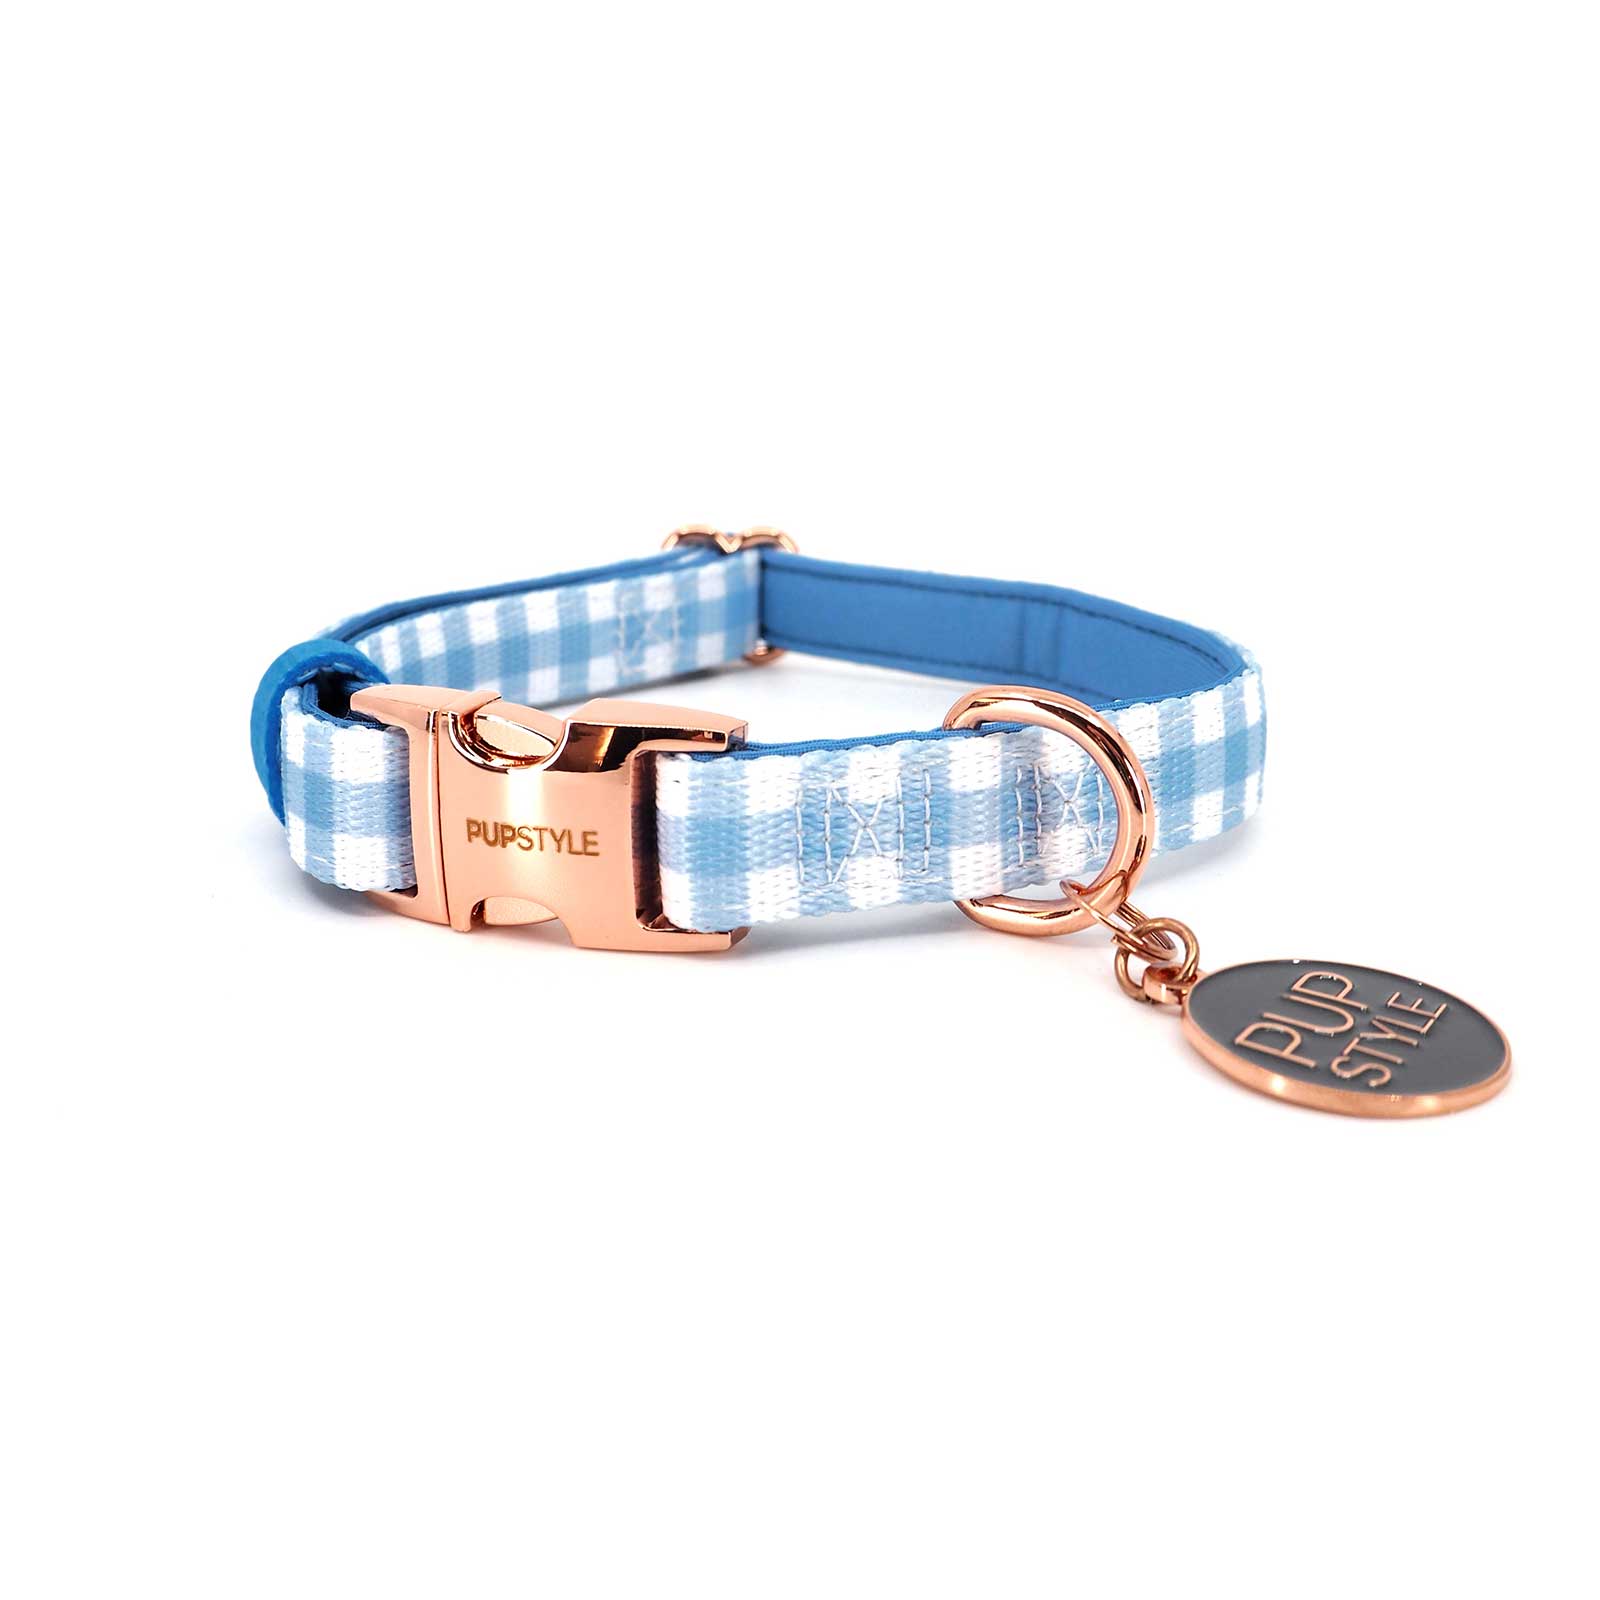 Pupstyle Dog Collar Blueberry Muffin